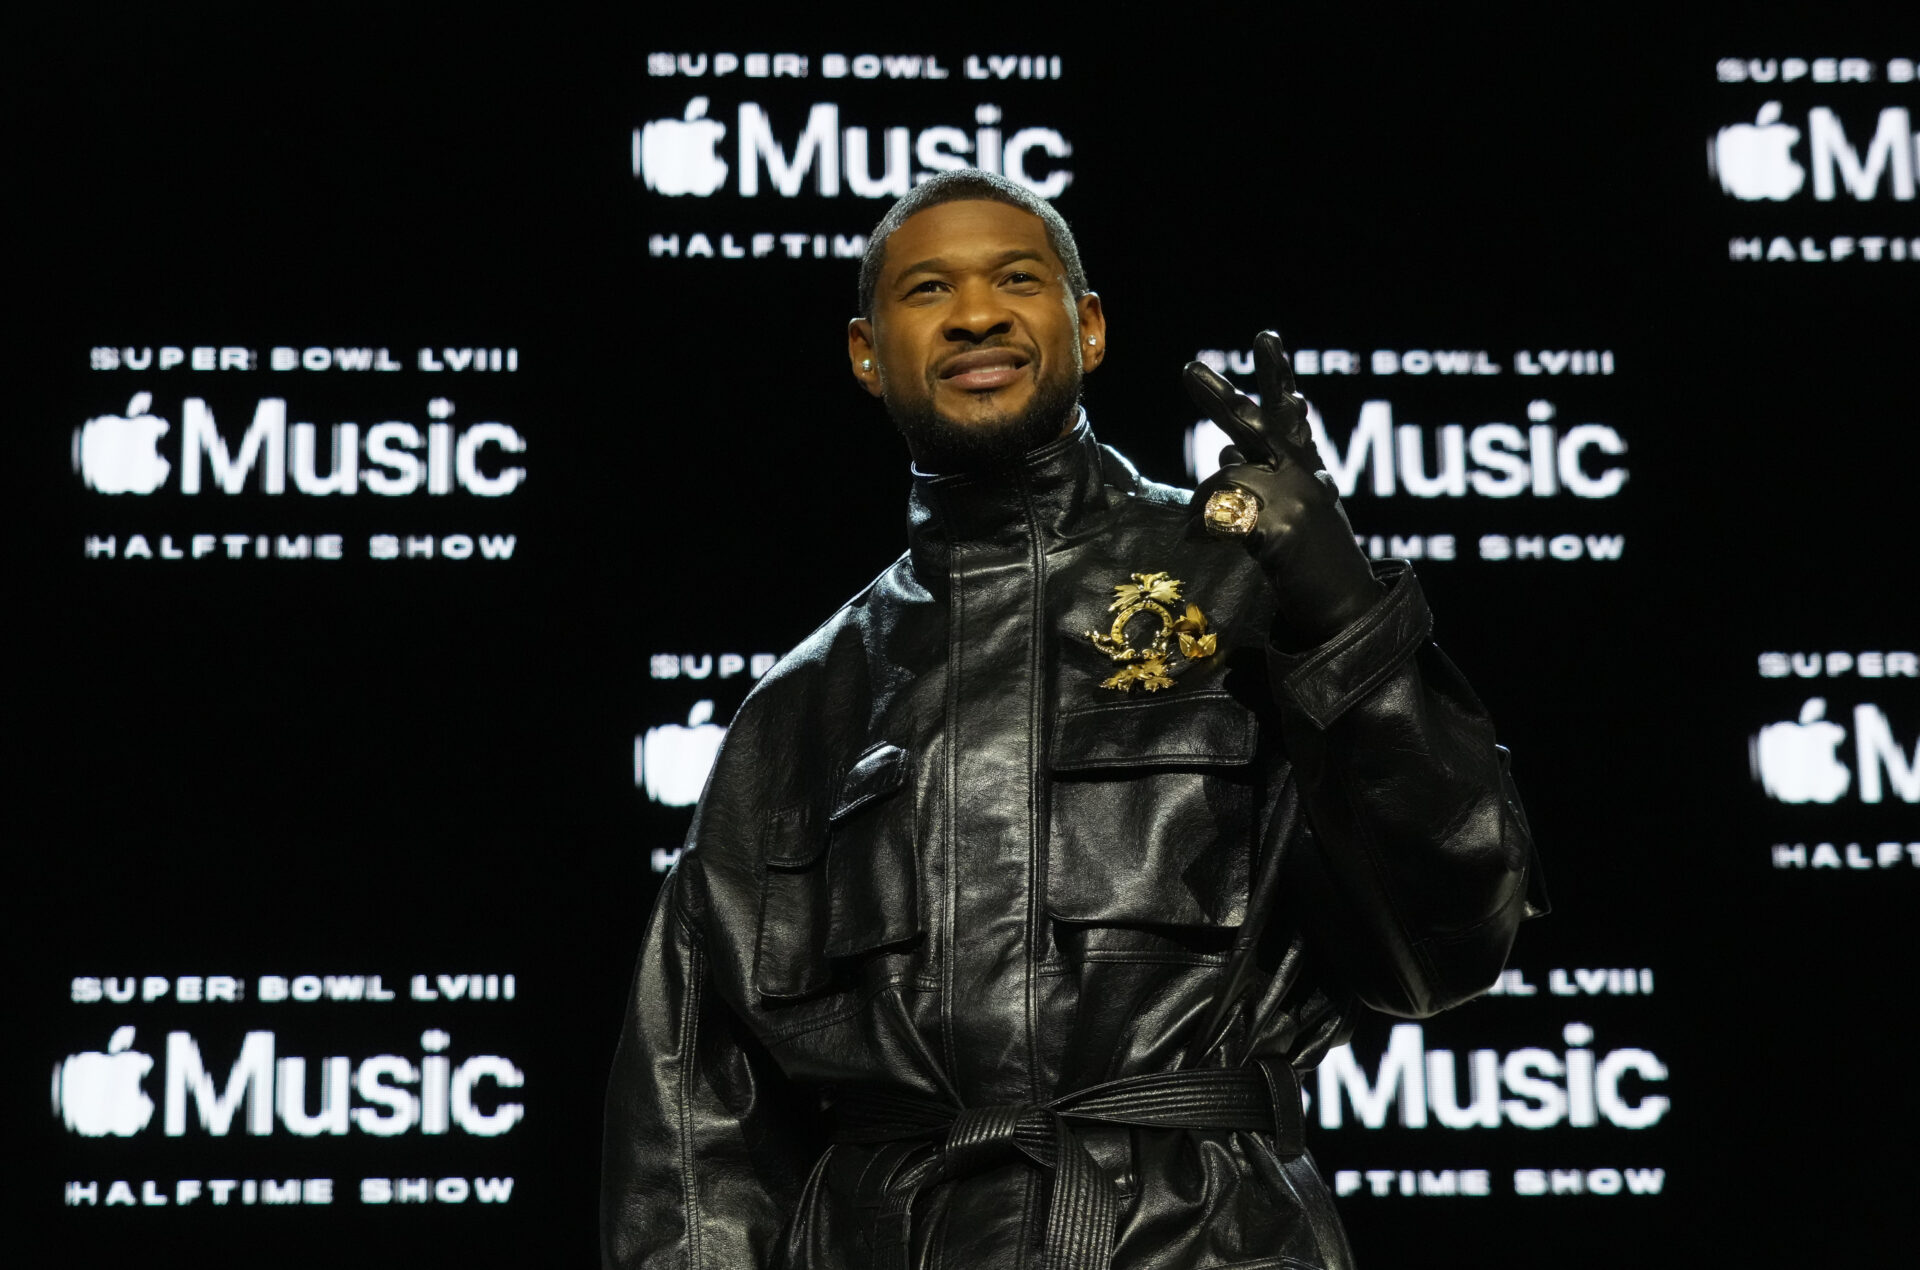 Recording artist Usher poses for photos during the Super Bowl LVIII pregame and halftime show press conference at the Mandalay Bay Convention Center.